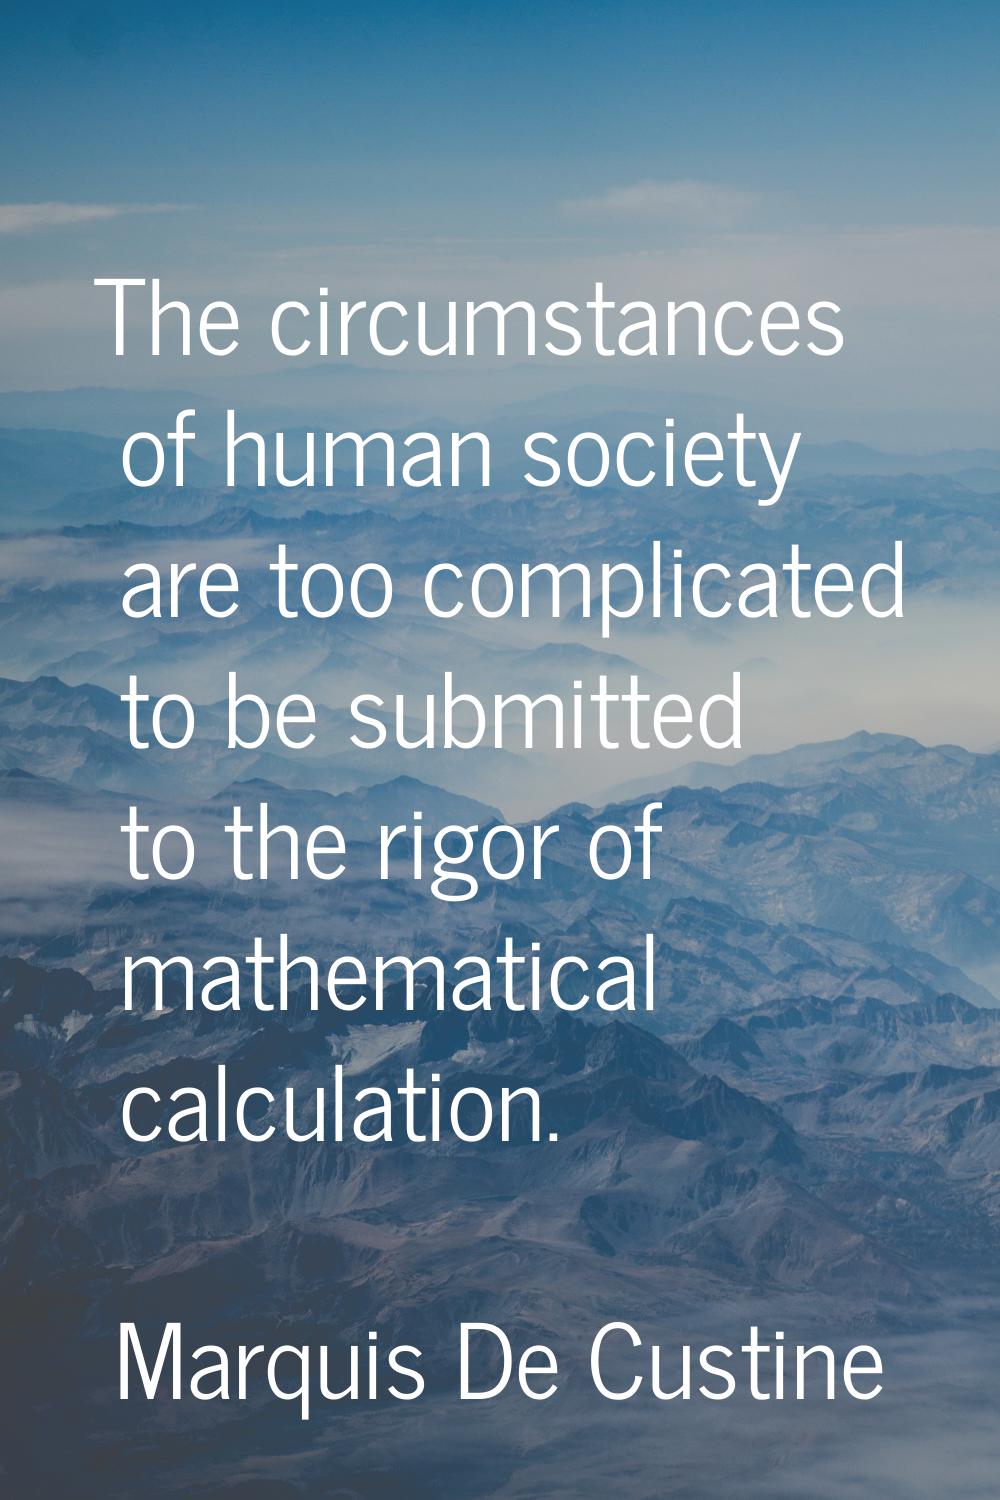 The circumstances of human society are too complicated to be submitted to the rigor of mathematical